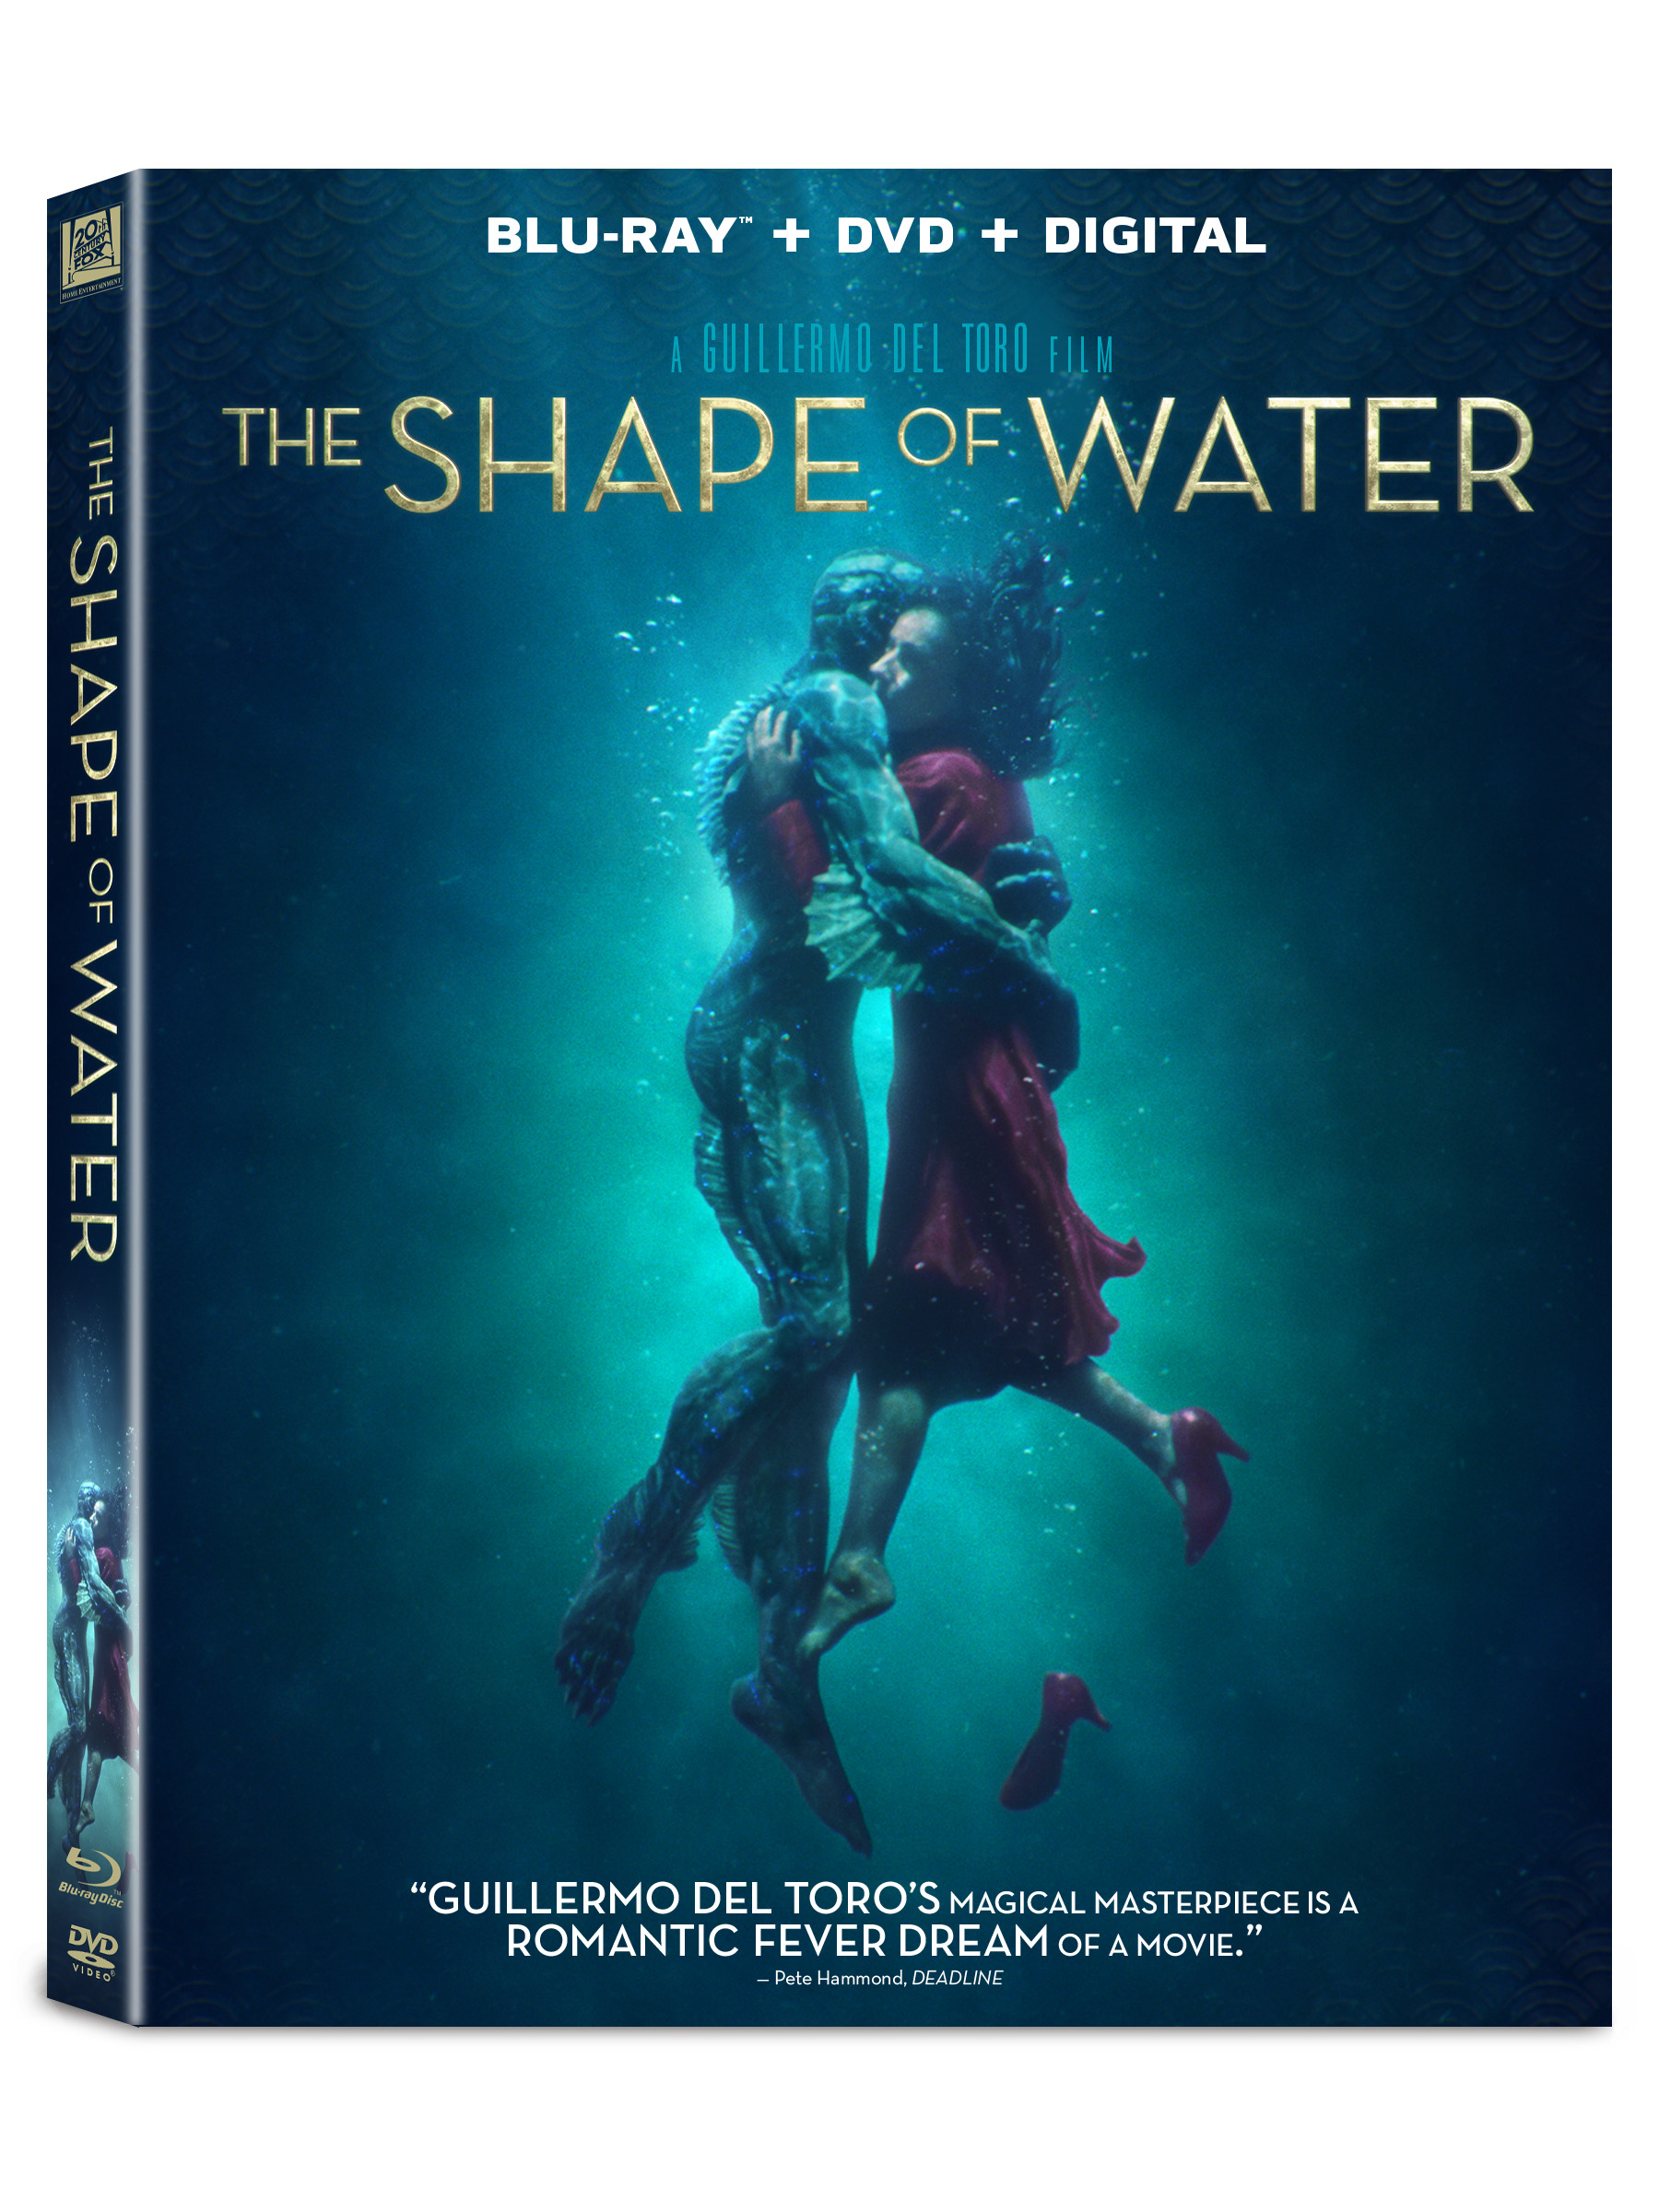 The Shape Of Water Blu-Ray Combo cover (20th Century Fox Home Entertainment)